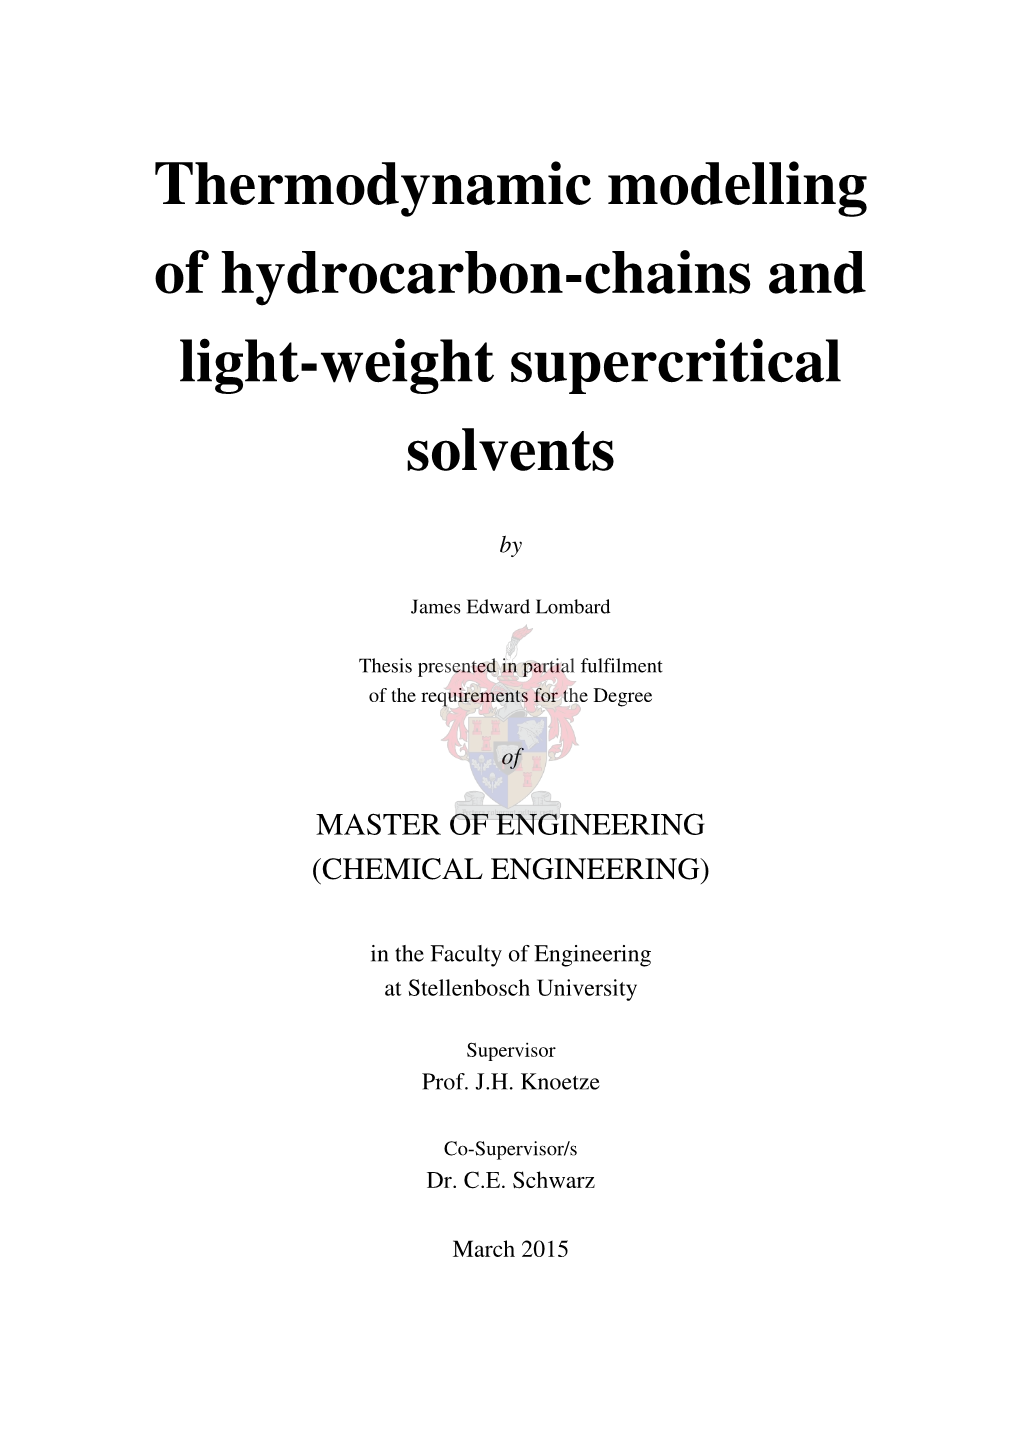 Thermodynamic Modelling of Hydrocarbon-Chains and Light-Weight Supercritical Solvents